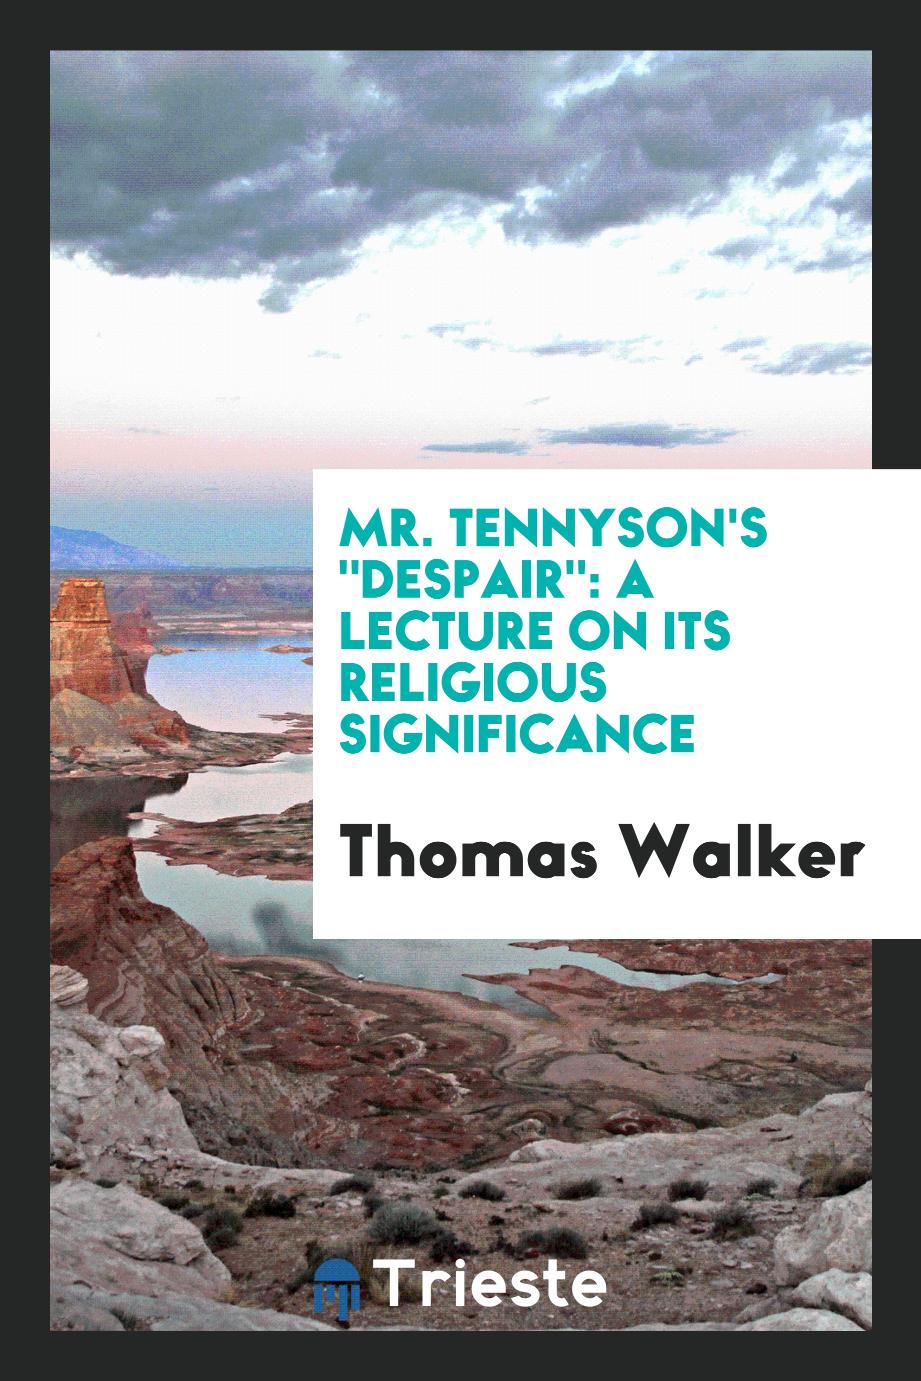 Mr. Tennyson's "Despair": A Lecture on Its Religious Significance